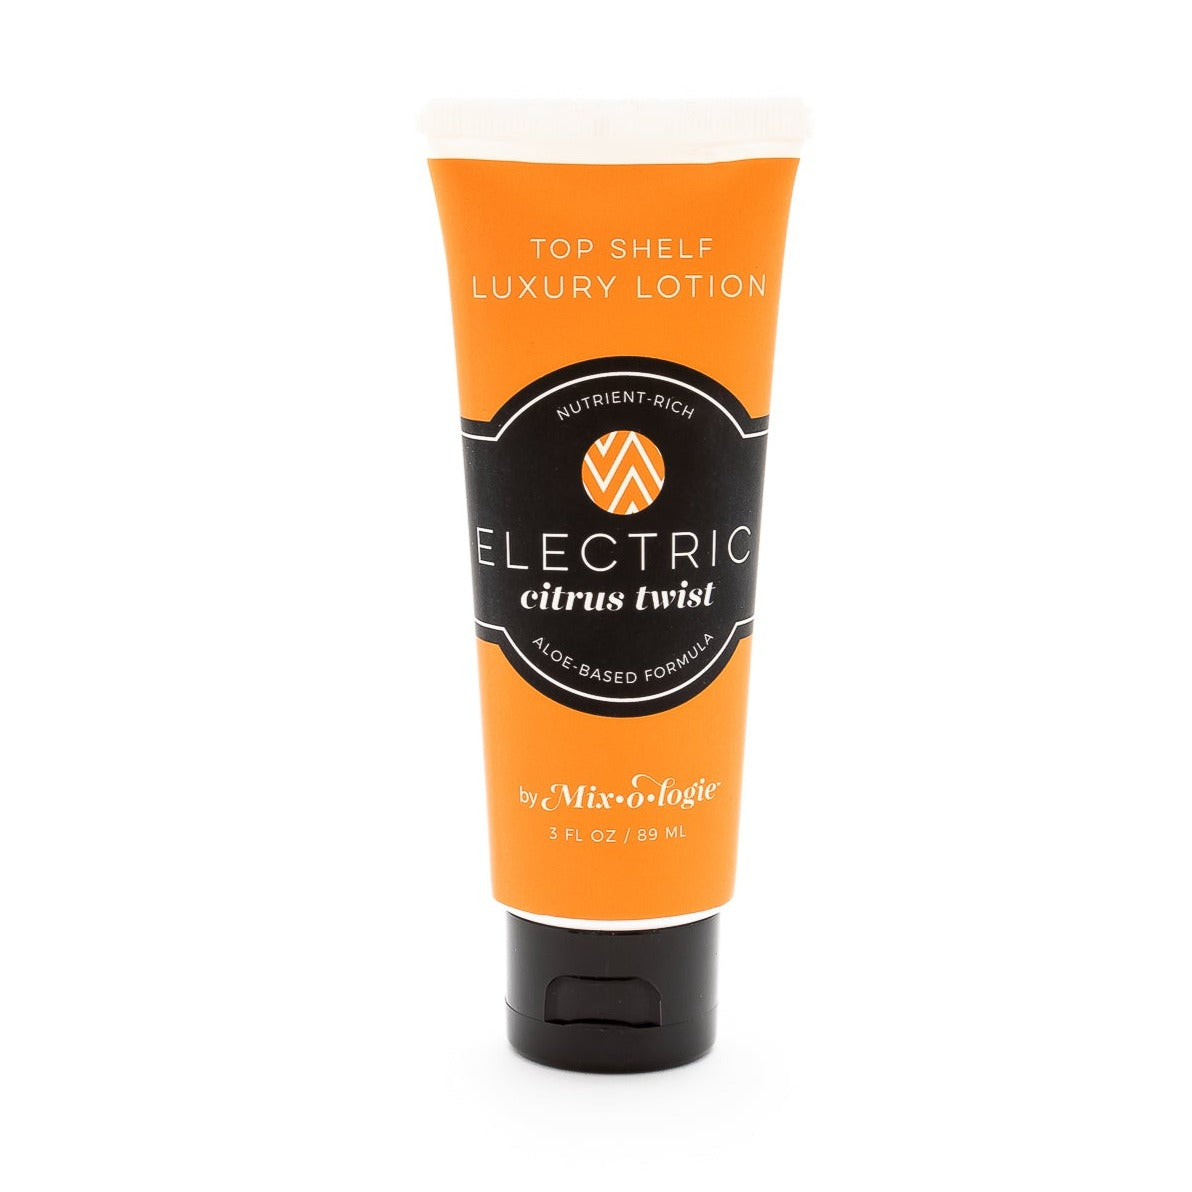 Electric (Citrus Twist) Top Shelf Lotion in orange tube with black lid and label. Nutrient rich, aloe-based formula, tube has 5 fl oz or 89 mL. Pictured with white background.